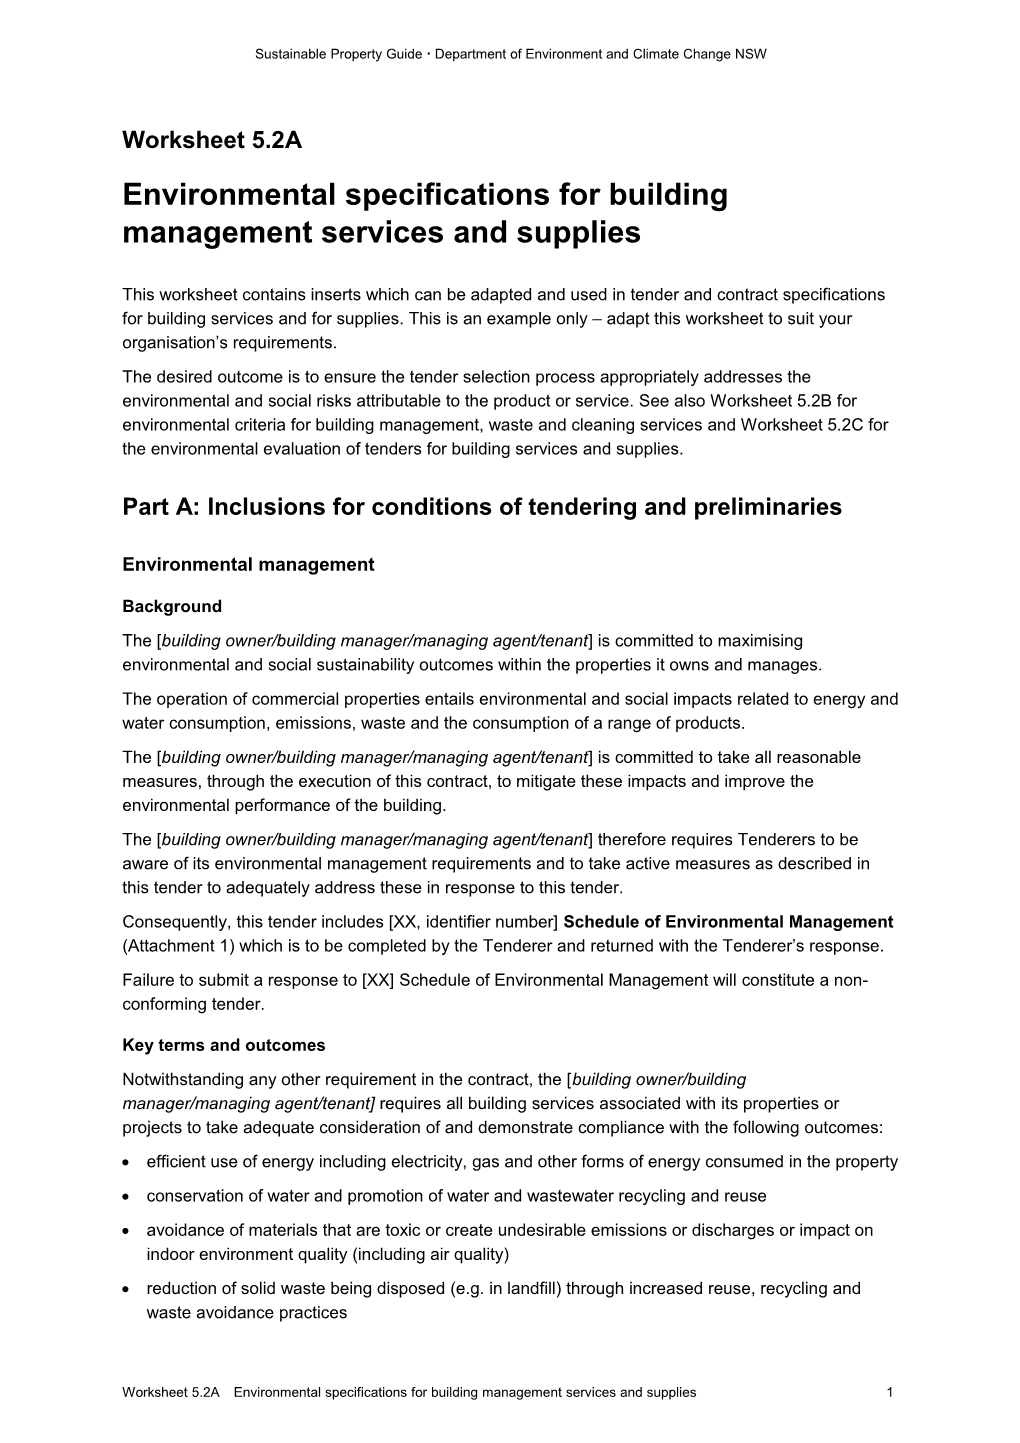 Environmental Specifications for Building Management Services and Supplies